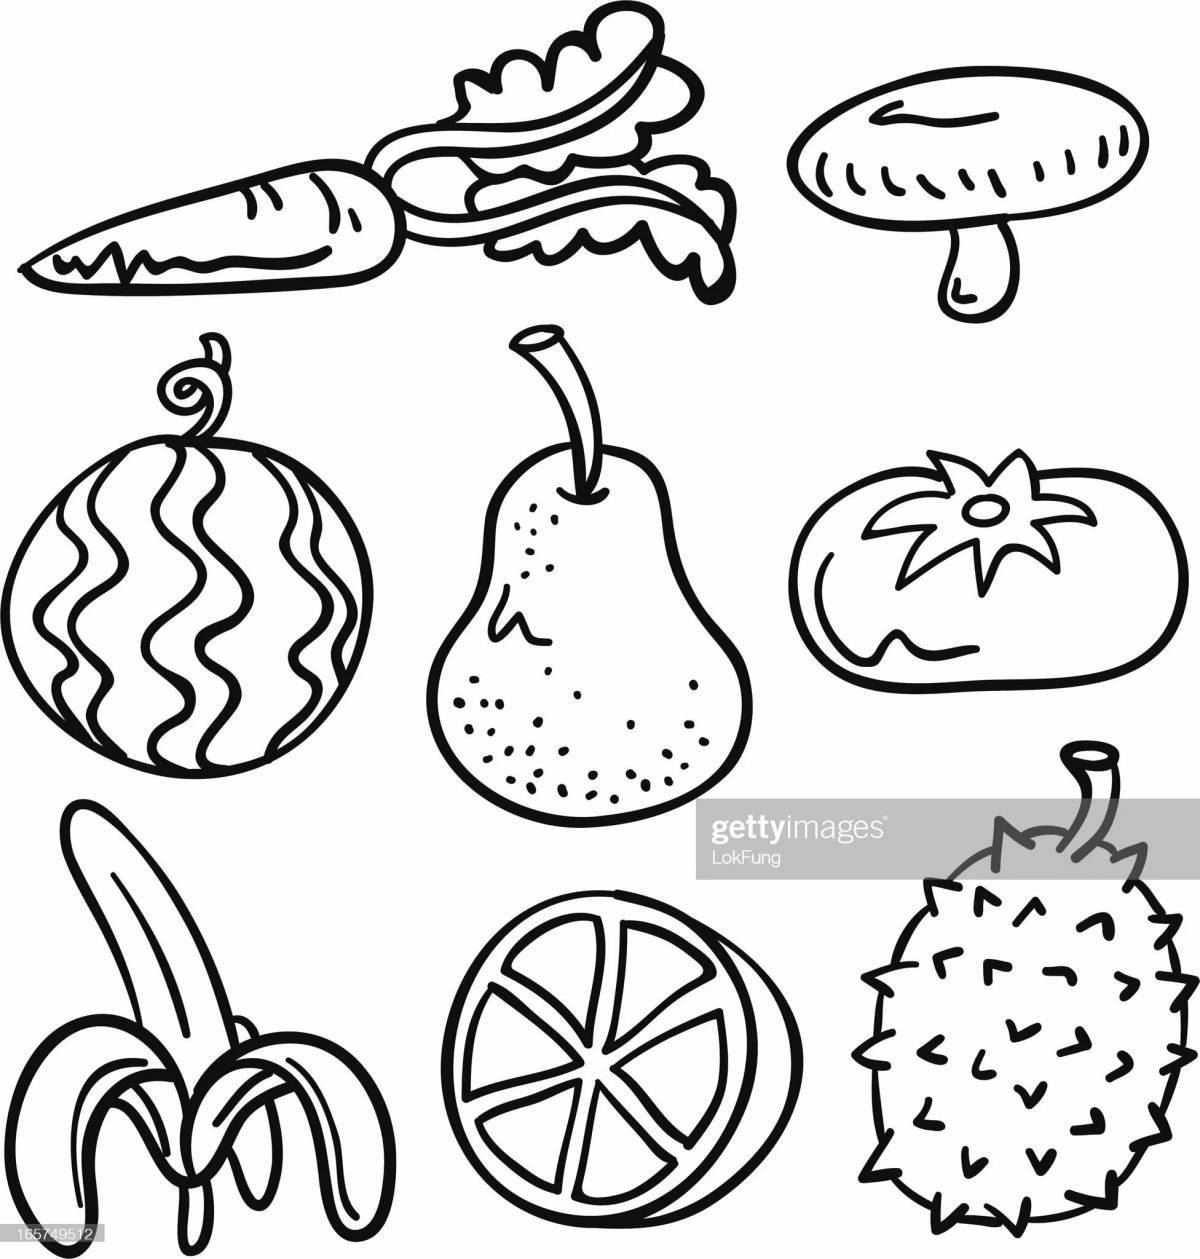 Interesting coloring pages with fruits and vegetables